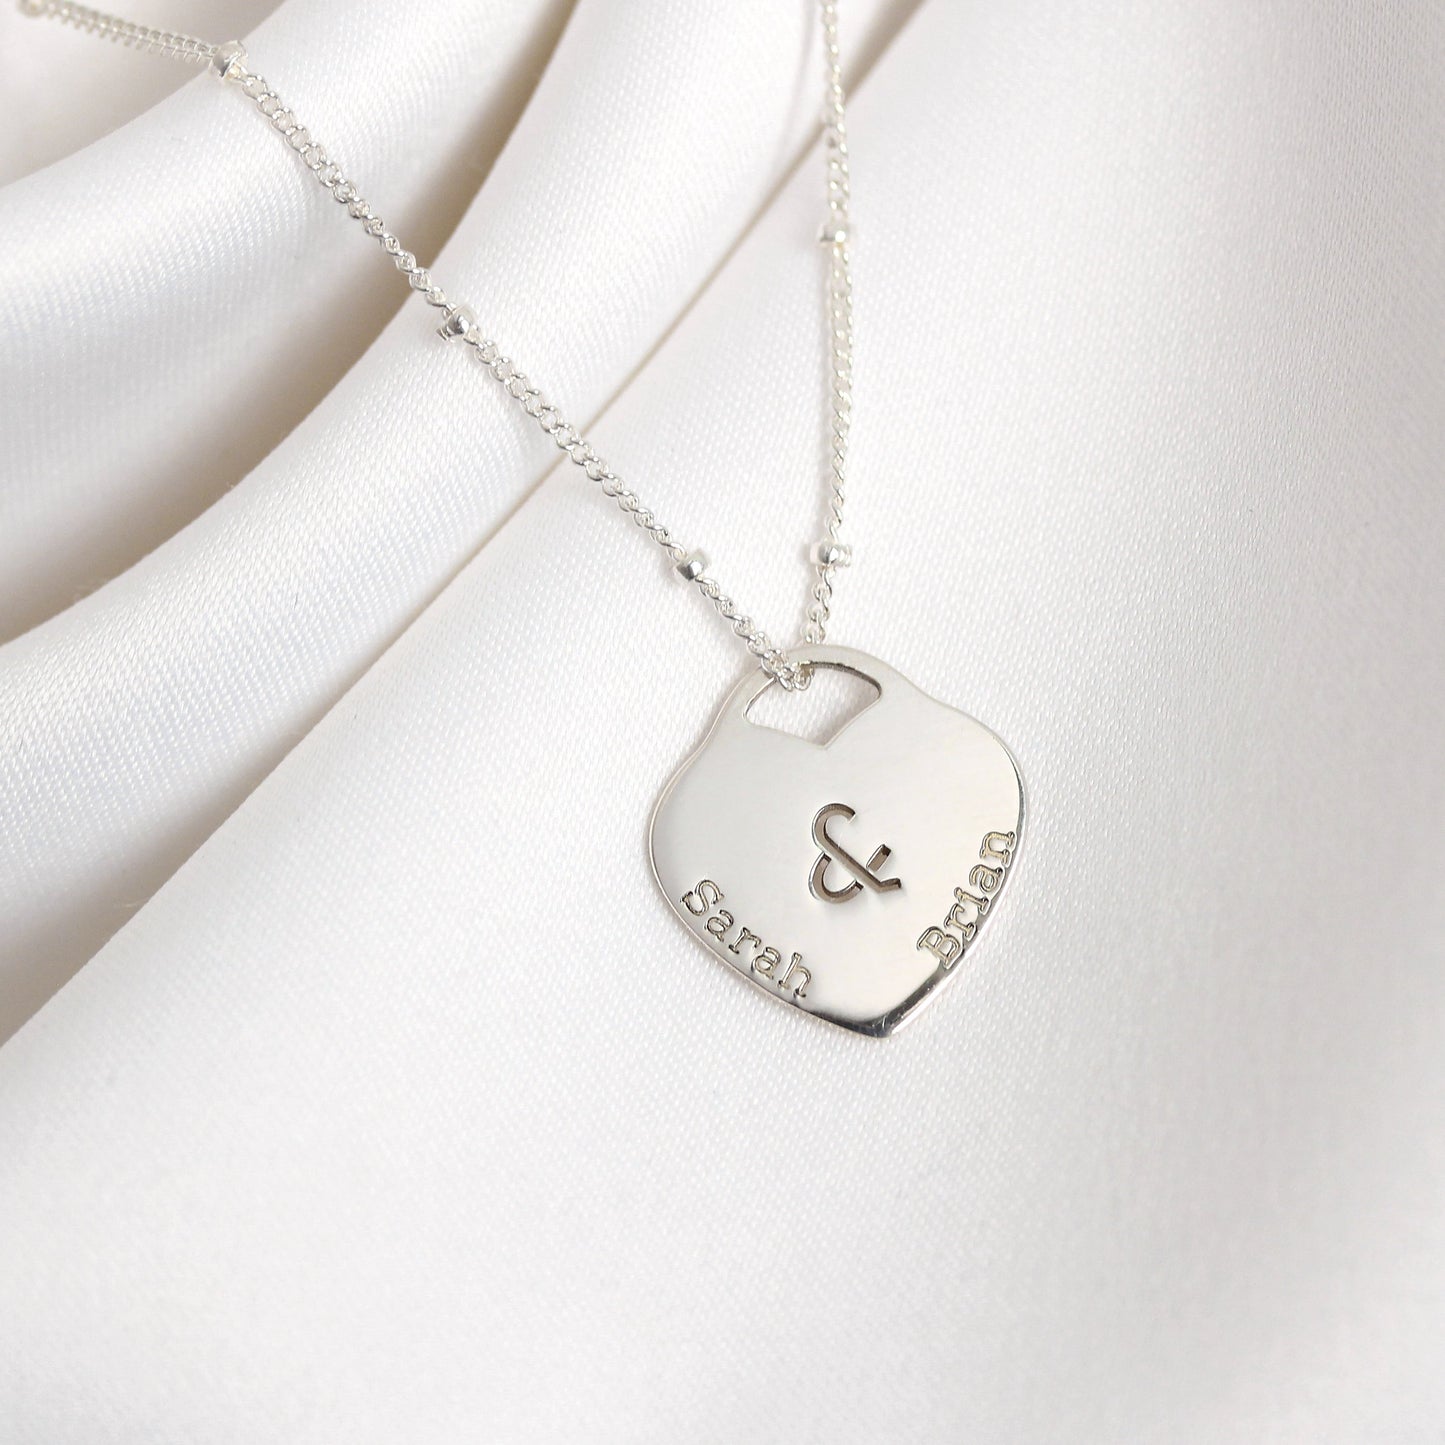 Bespoke Personalised Double Name Heart Necklace 12-24 Inches